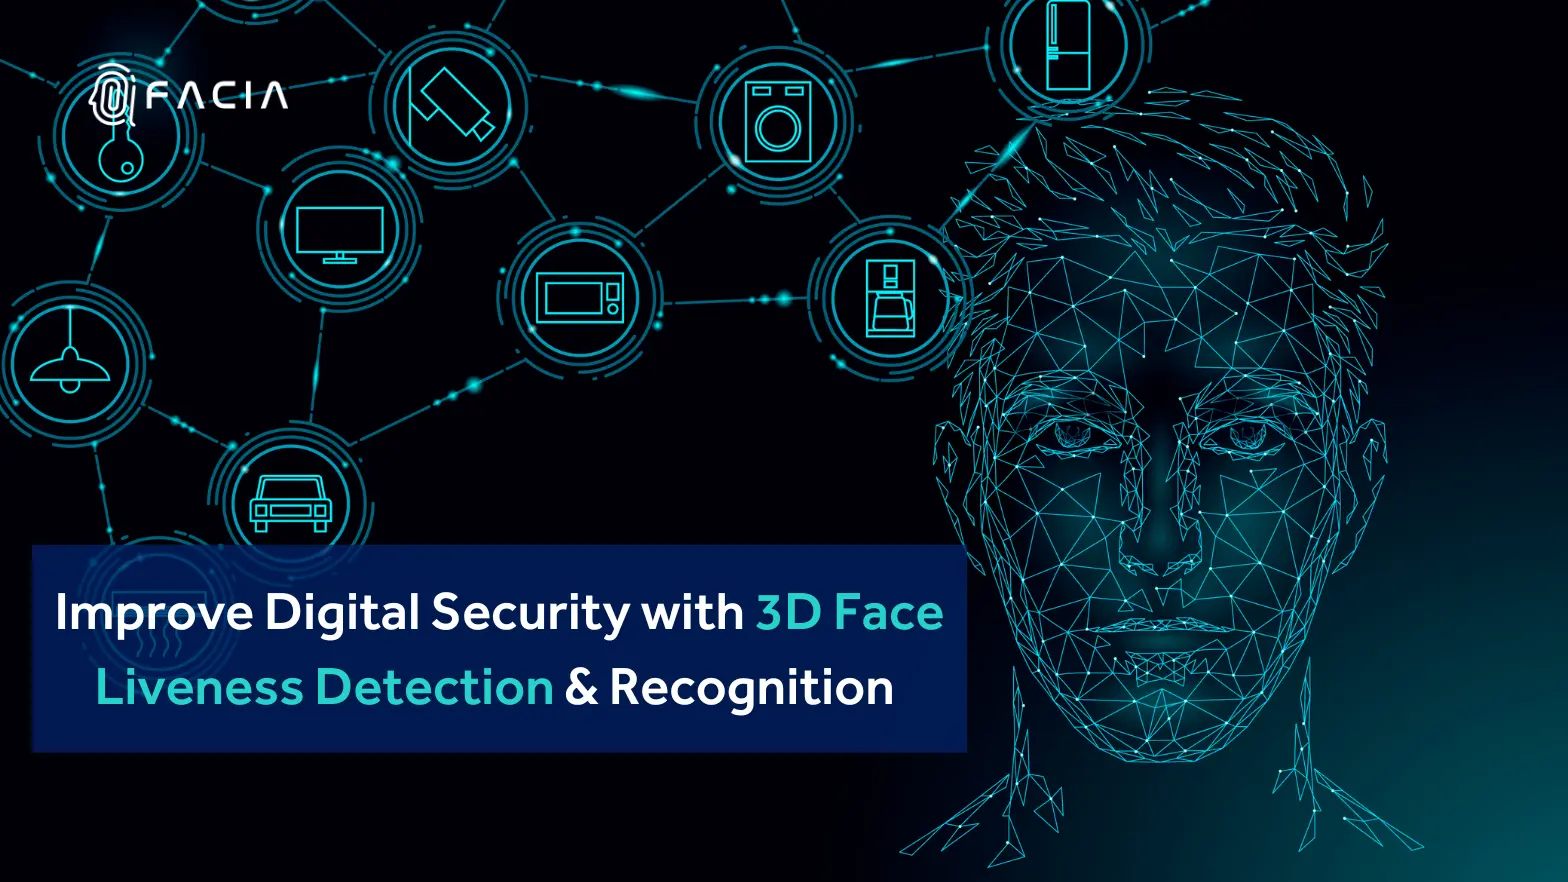 Utilizing 3D face recognition to bolster digital security and authentication measures.